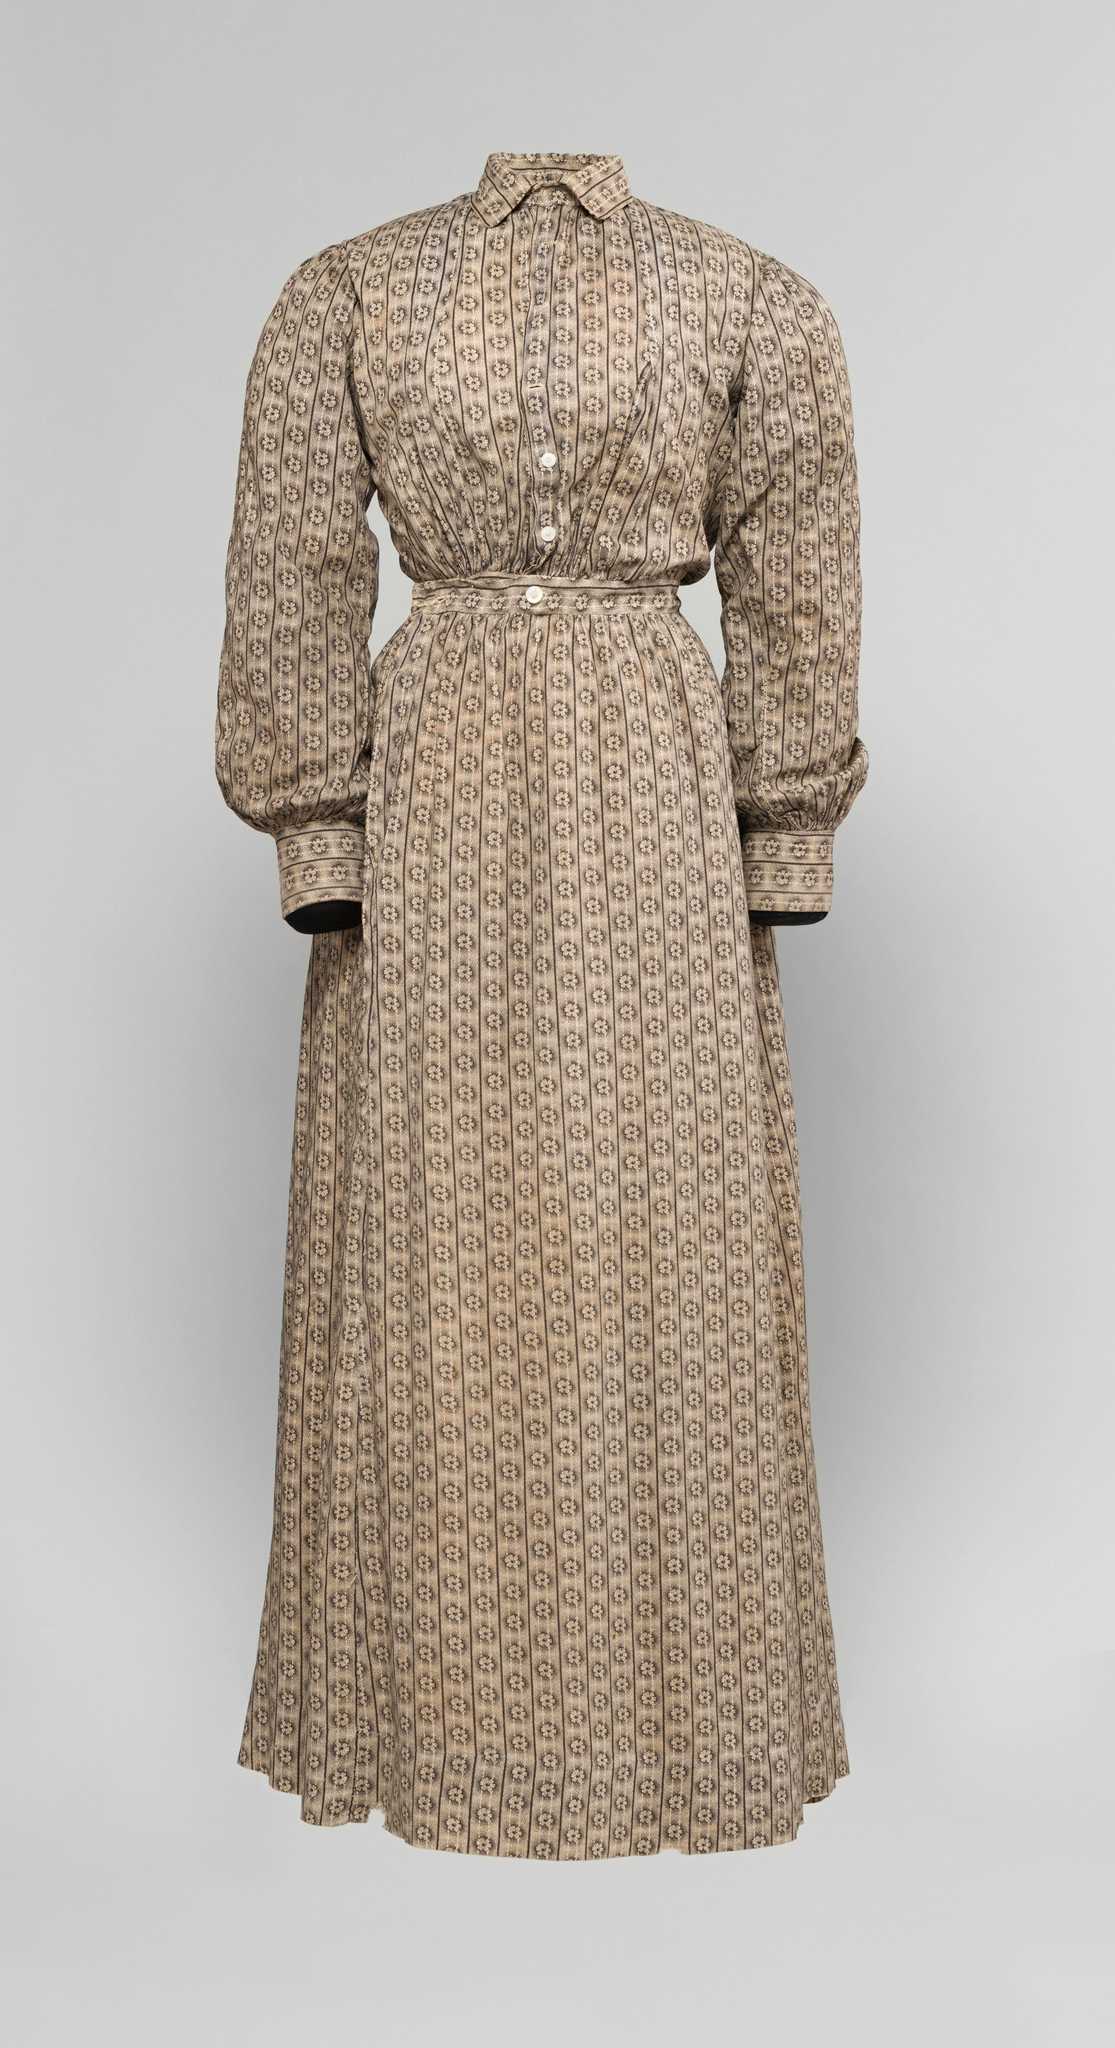 A single piece handsewn dress believed to have been worn by the formerly enslaved woman Tempy Ruby Bryant and handed down through her descendants. The dress is composed of a brown and taupe colored floral patterned fabric. The pattern has columns of flowers bordered by dark vertical lines with light vertical lines running through the flowers. The dress has white buttons at the waist, in a single row from waist to collar. Four buttons are missing: one at the waist and three near the collar. There is neat tucking at the waist band and sleeve cuffs.